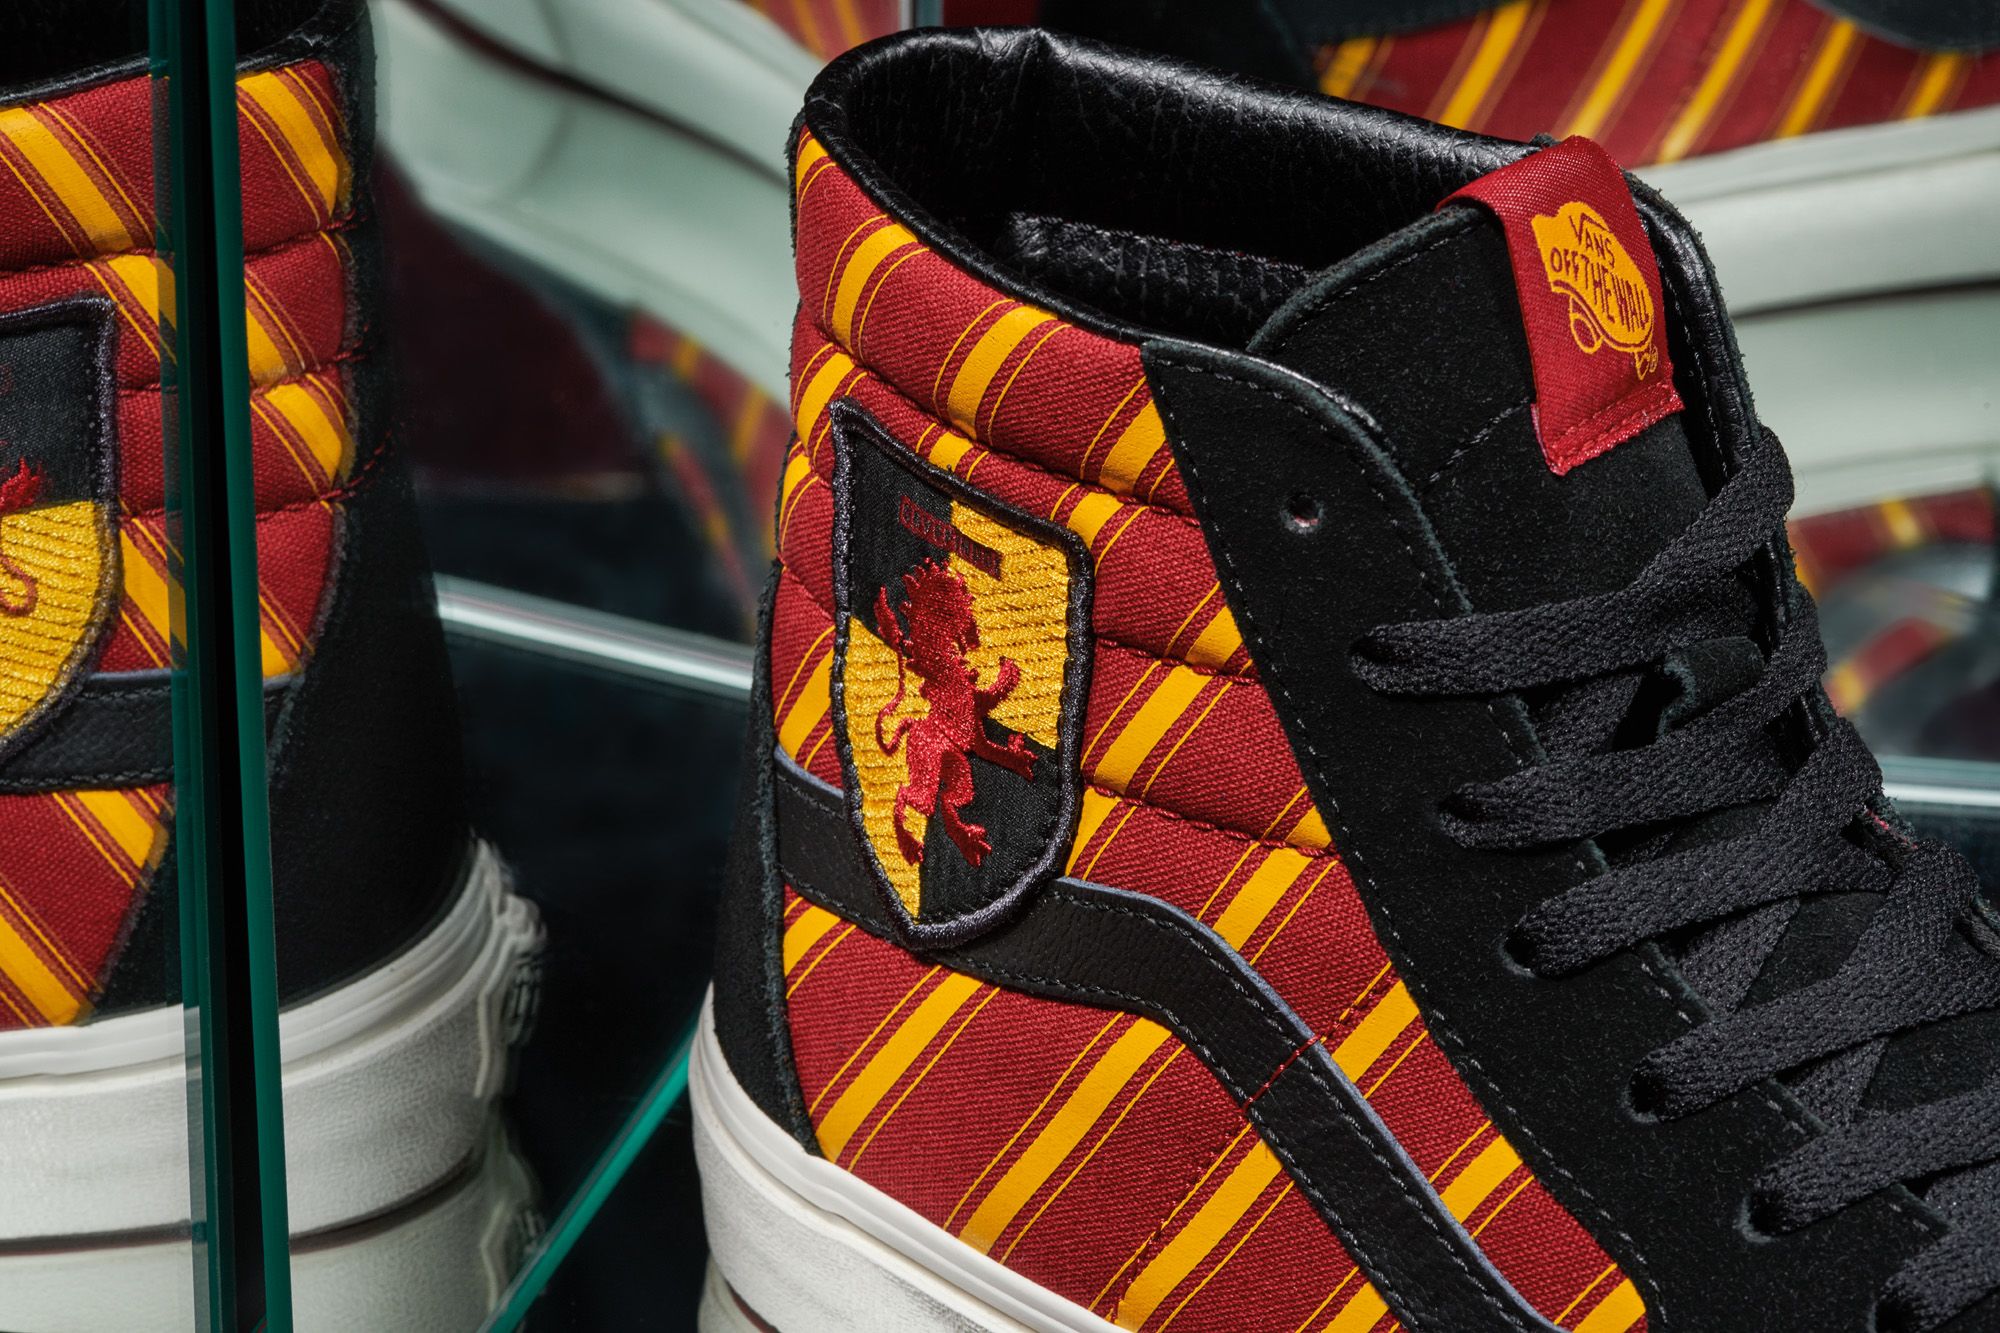 Harry Potter Vans  Harry potter shoes, Harry potter accessories, Harry  potter outfits